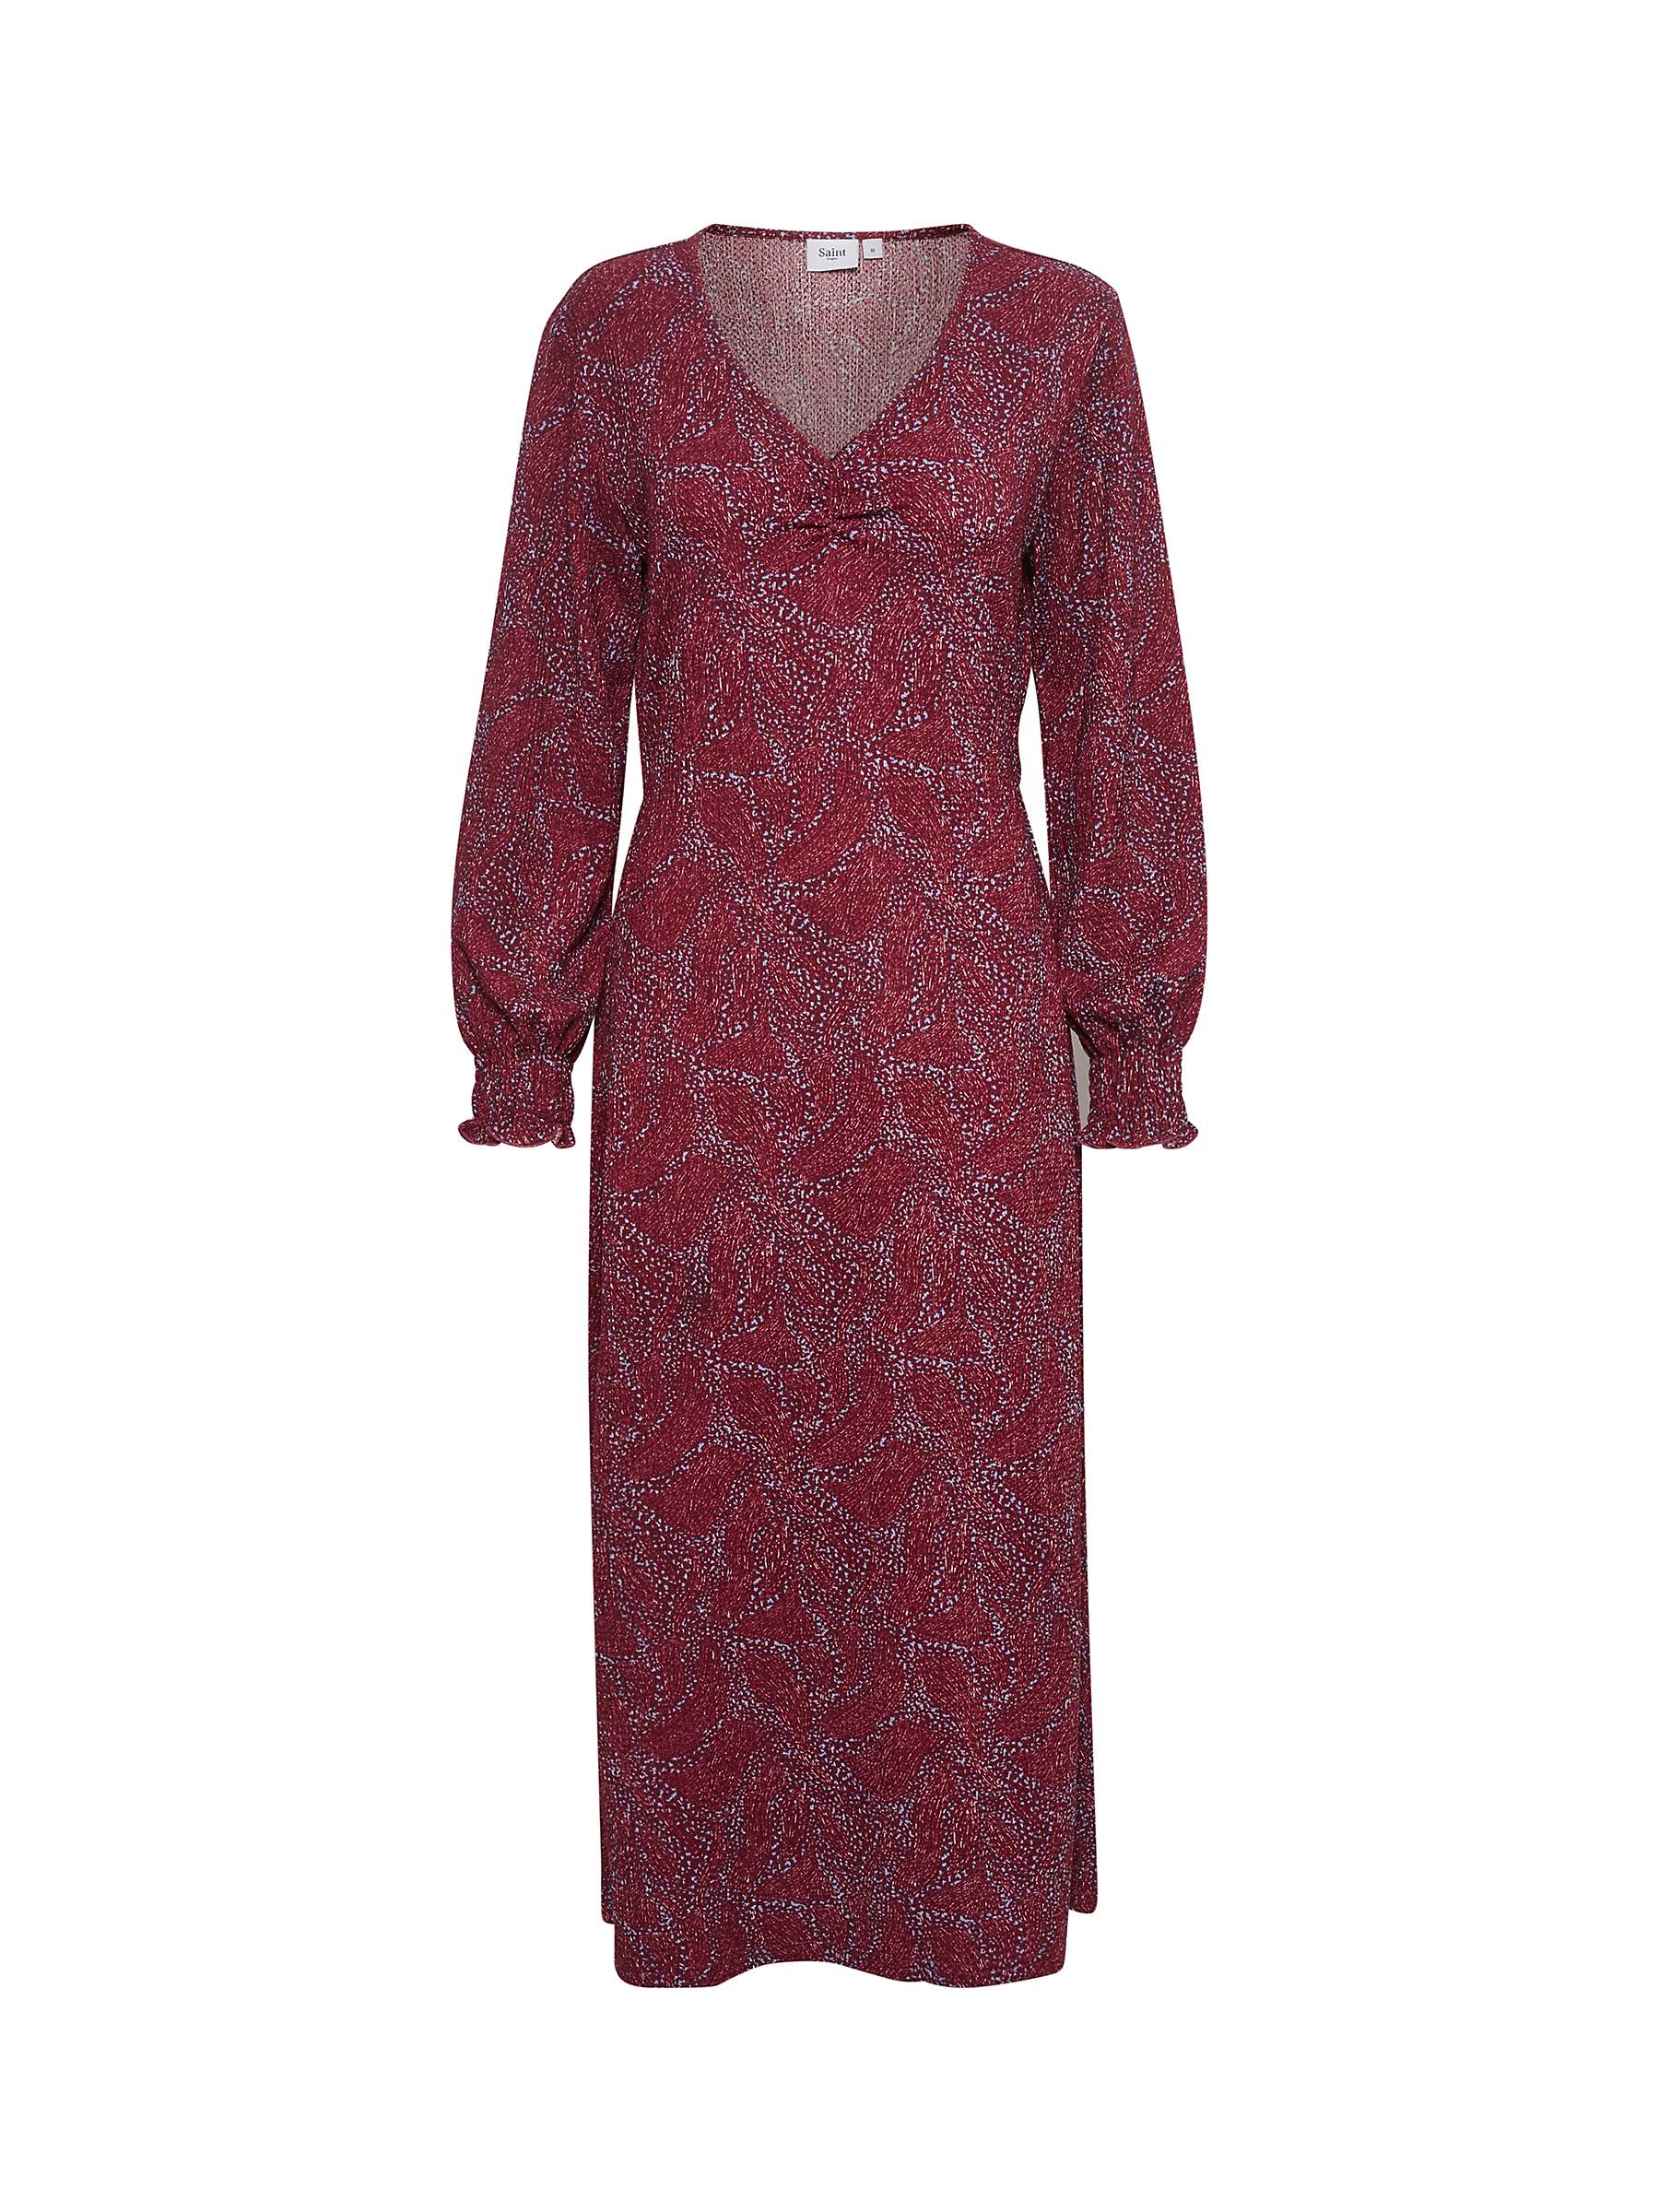 Buy Saint Tropez Averie Abstract Print Maxi Dress, Red/Multi Online at johnlewis.com